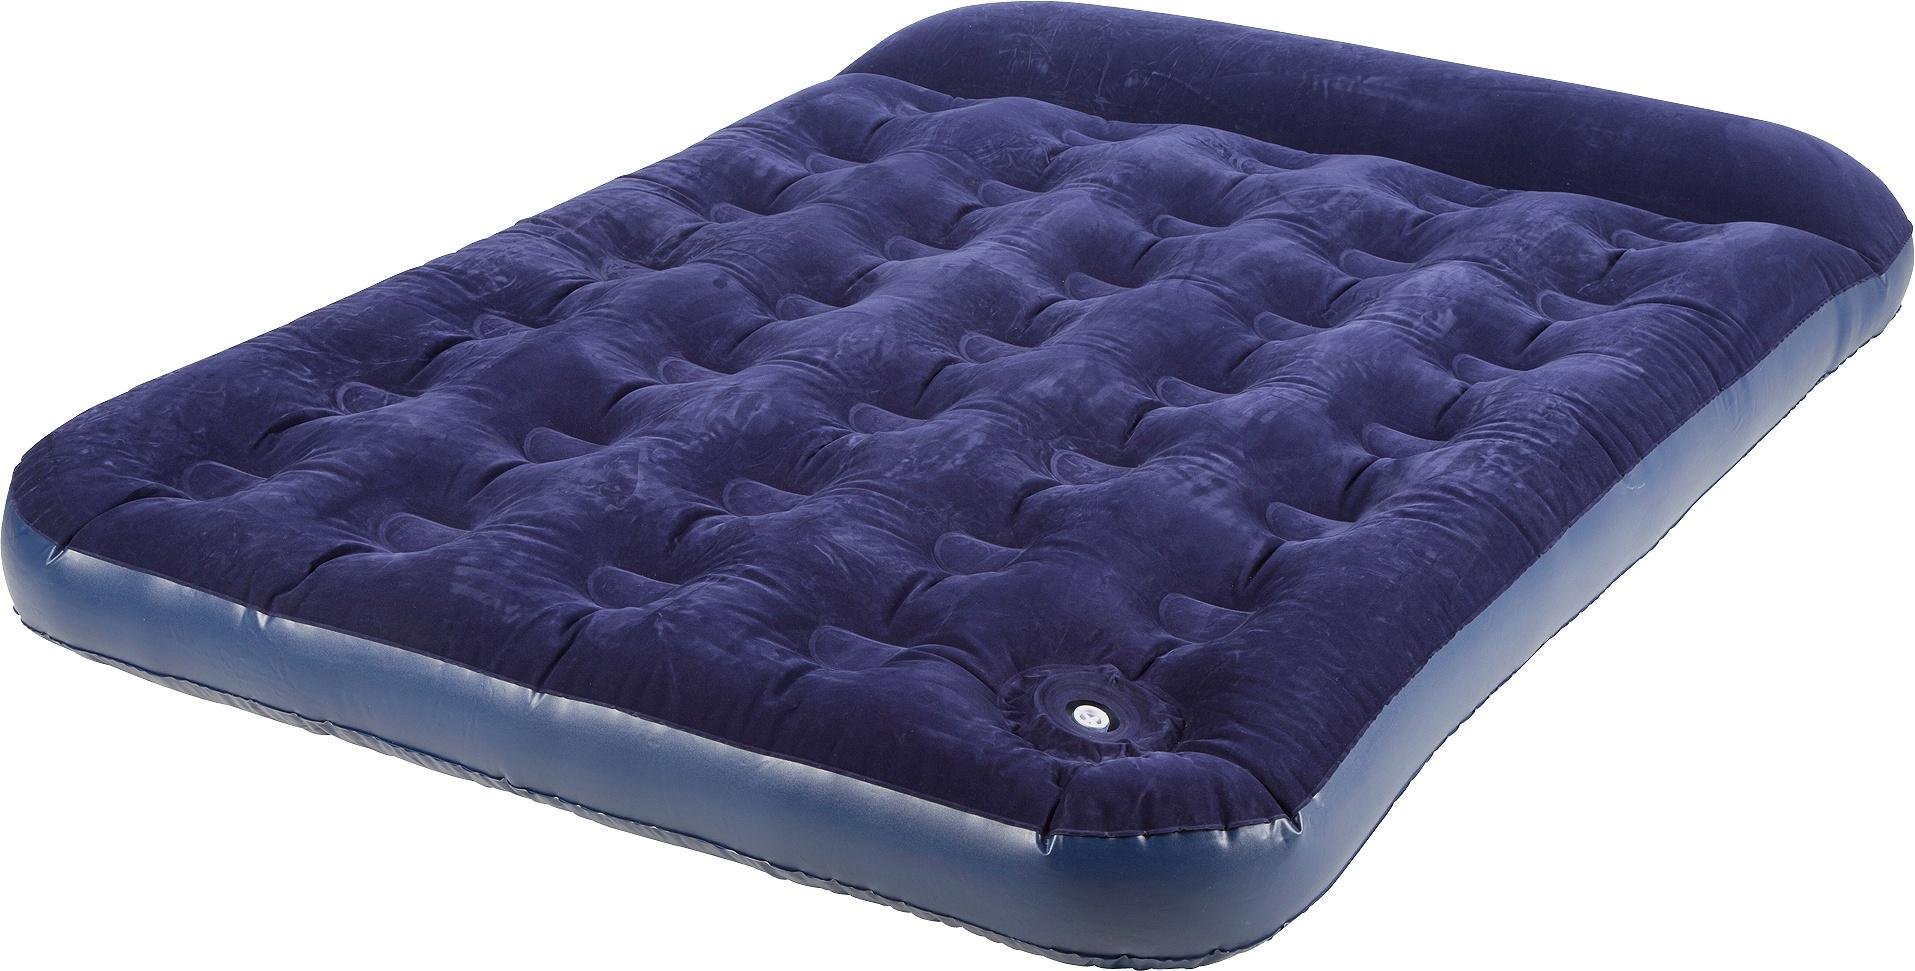 Review of Bestway - Air Bed with Built In Pump - Kingsize